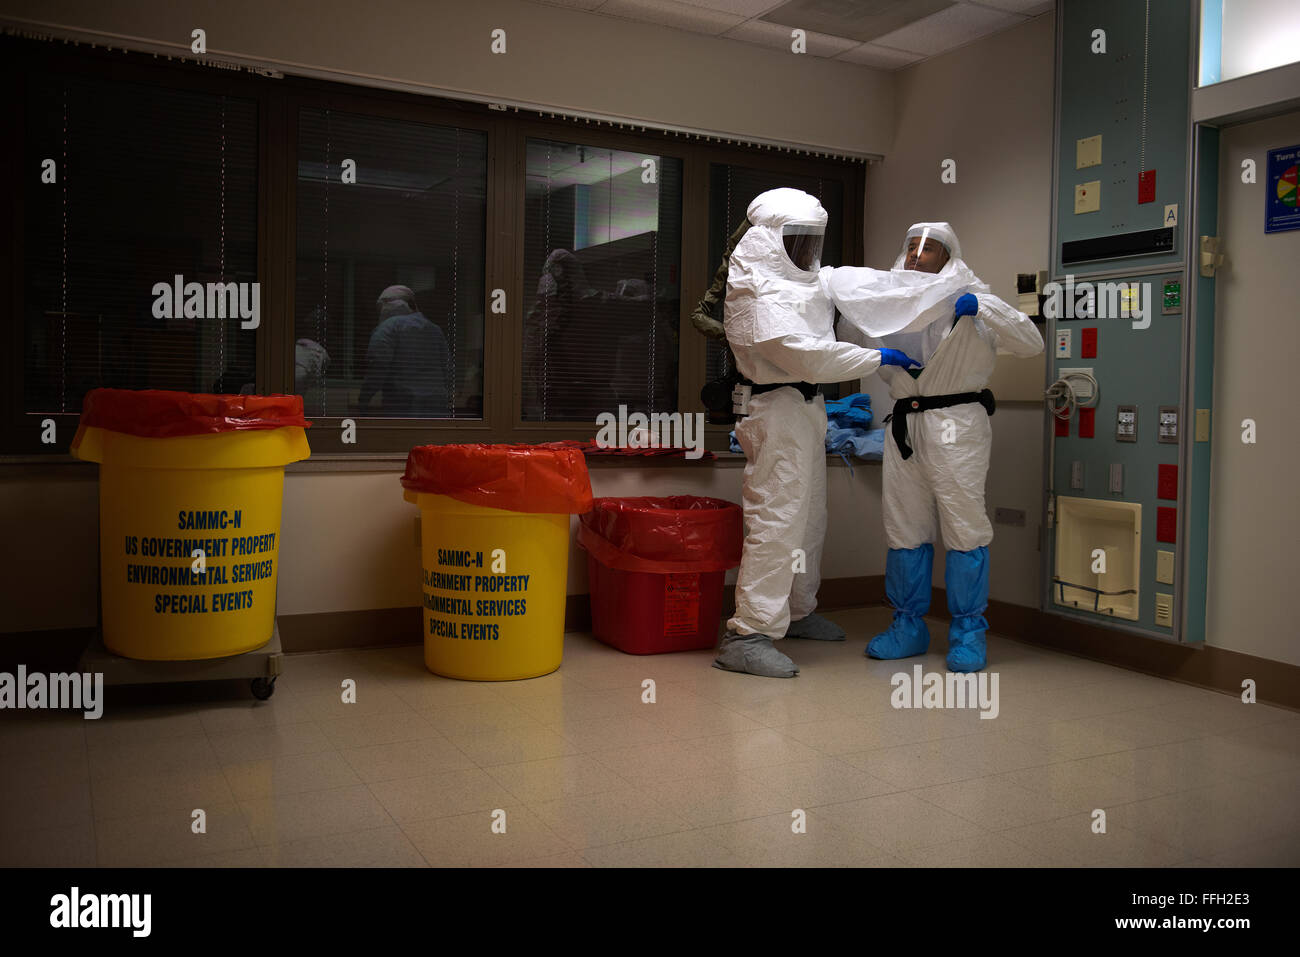 U.S. Army Capts. Kirt Cline and Troy Dilmar remove their personal protective equipment during training at the San Antonio Military Medical Center, Texas. Cline and Dilmar are part of the Defense Department's 30-member team designed to respond to any potential Ebola virus outbreak in the United States. Stock Photo